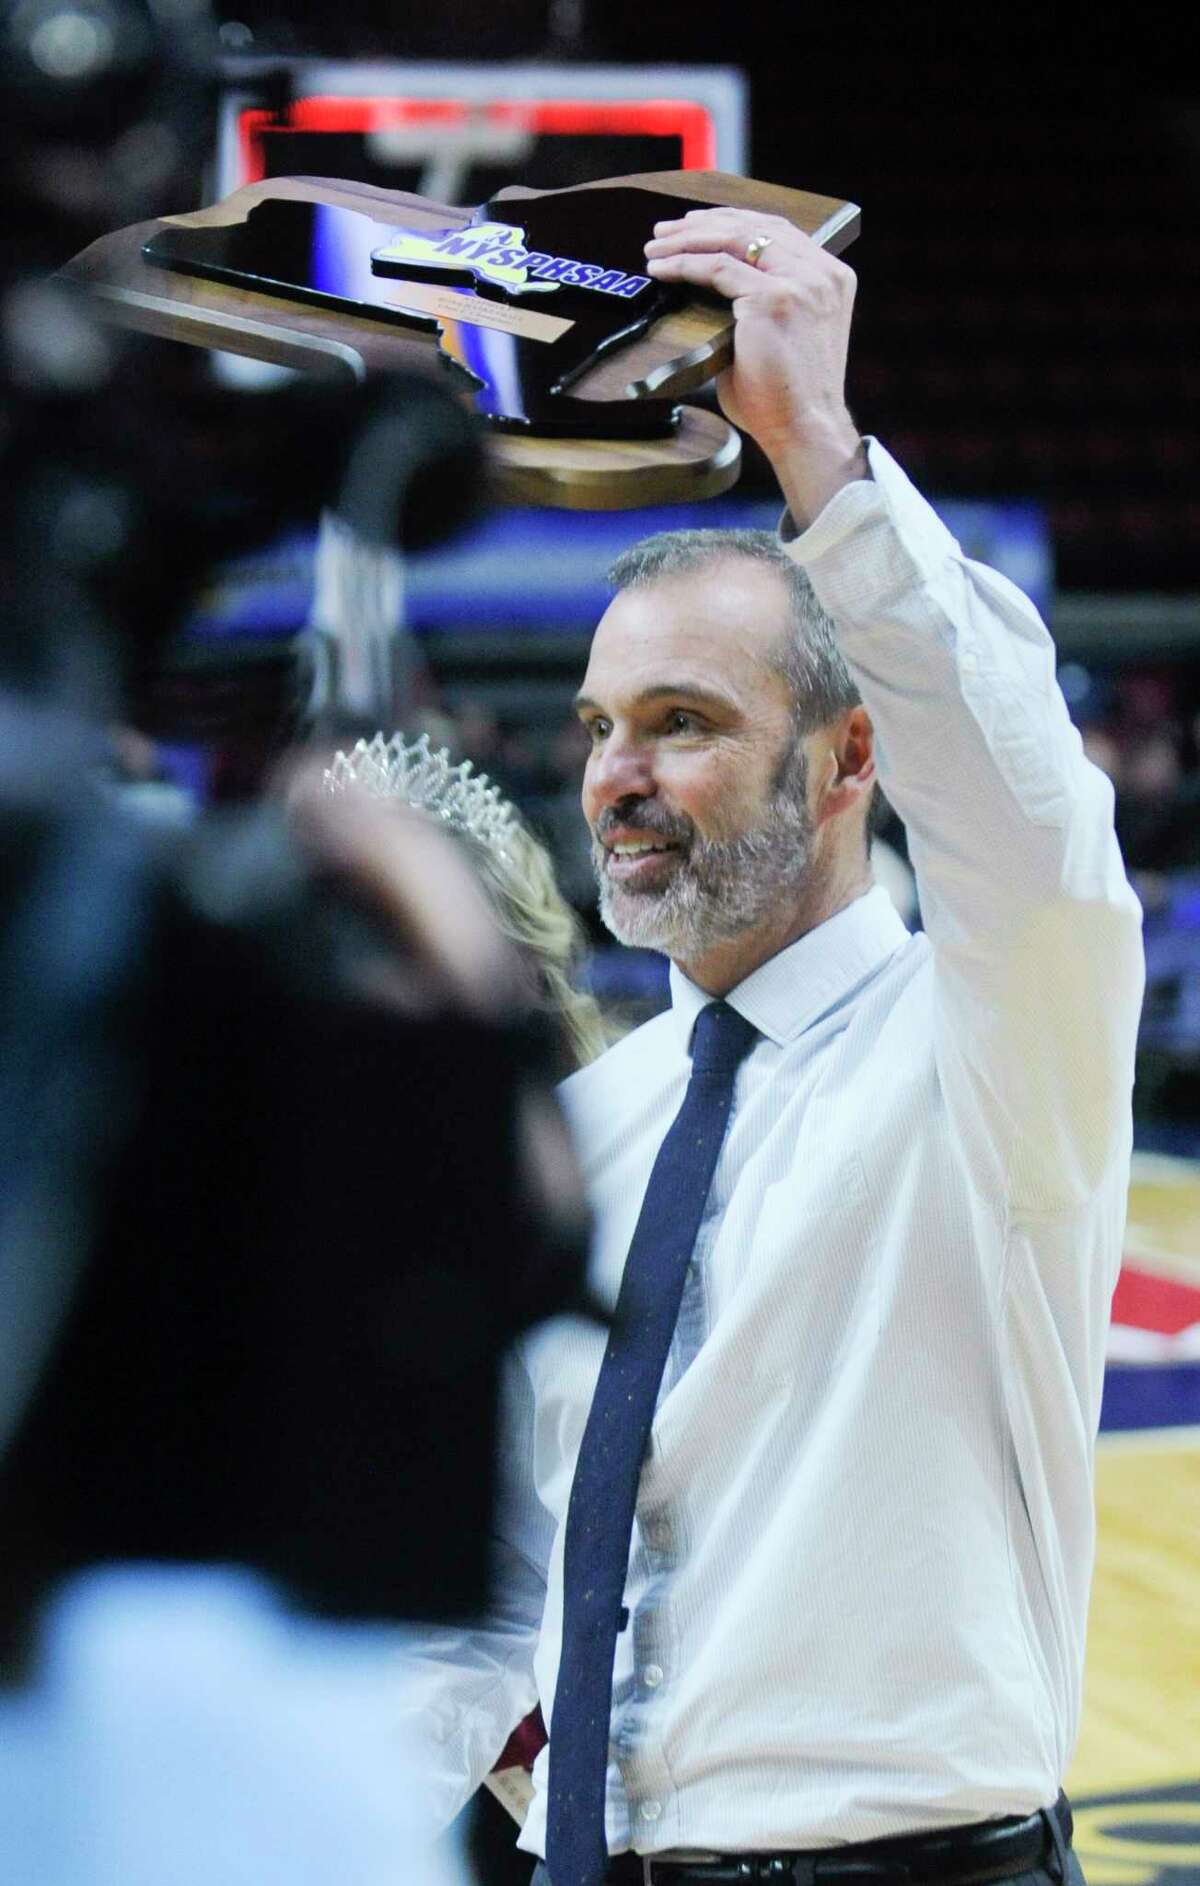 Lake George coach Dave Jones hoists the championship trophy after Lake George beat Northstar Christian Academy, 65-64, in the NYSPHSAA Class C Boys Basketball final on Saturday, March 17, 2018, at Floyd L. Maines Arena in Binghamton, N.Y. (Tim Roske/Special to the Times Union)